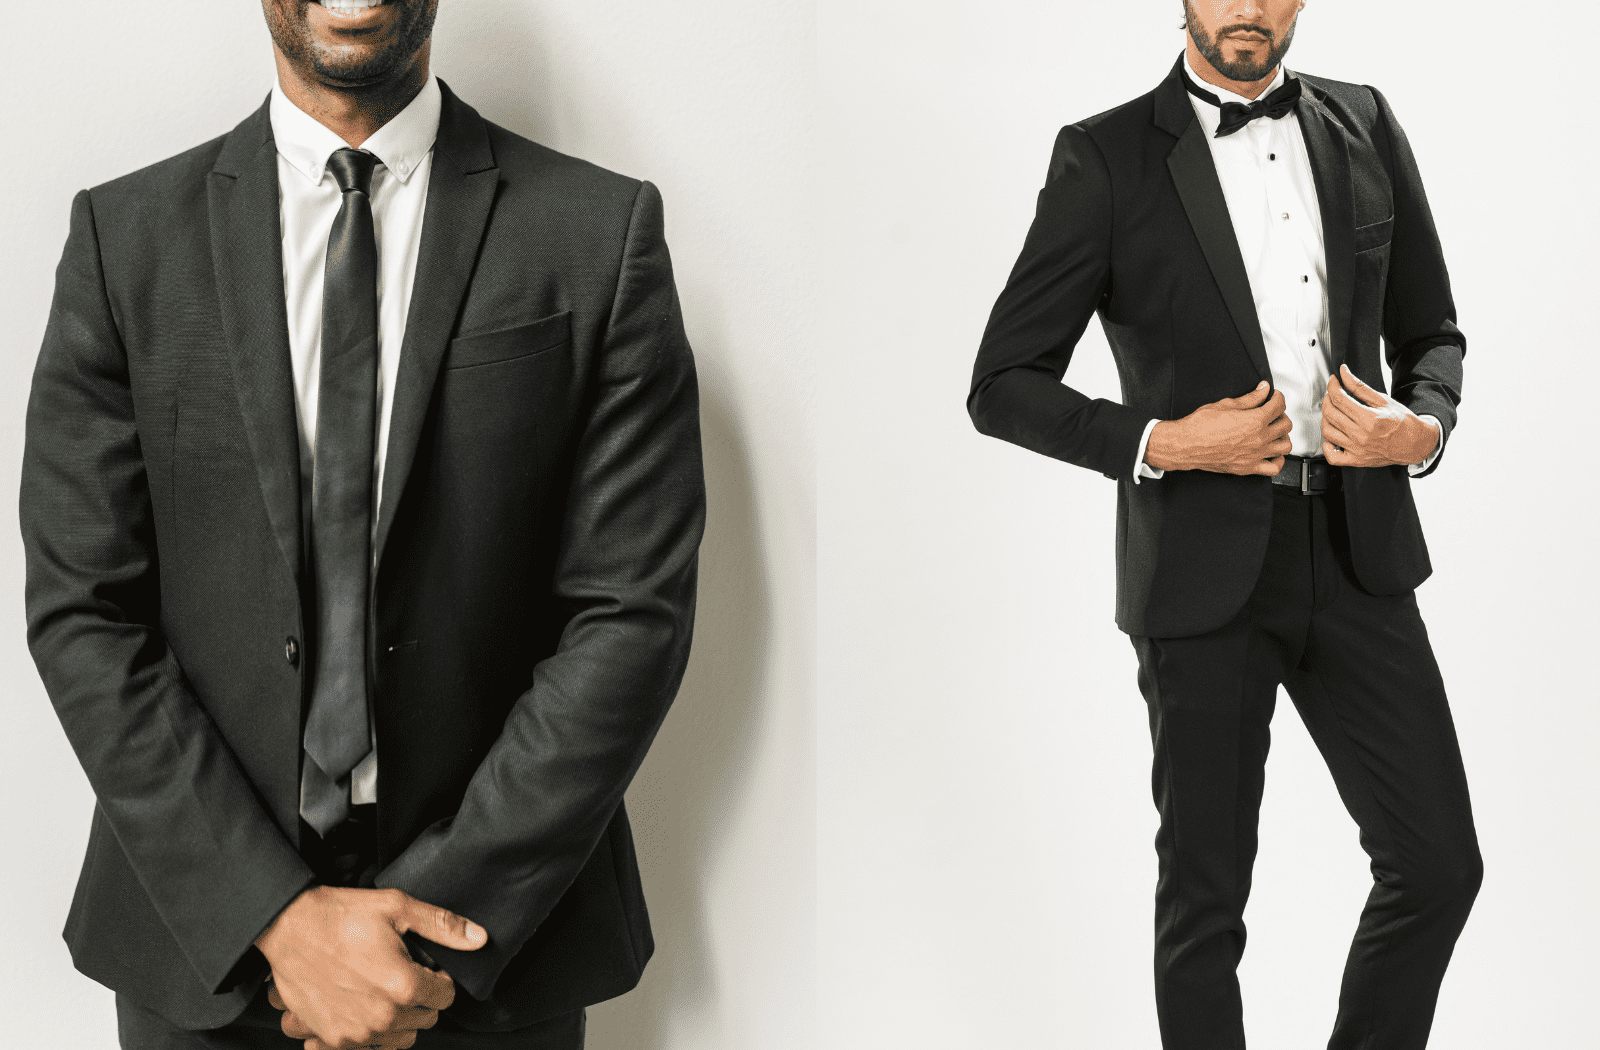 tuxedo vs suit difference